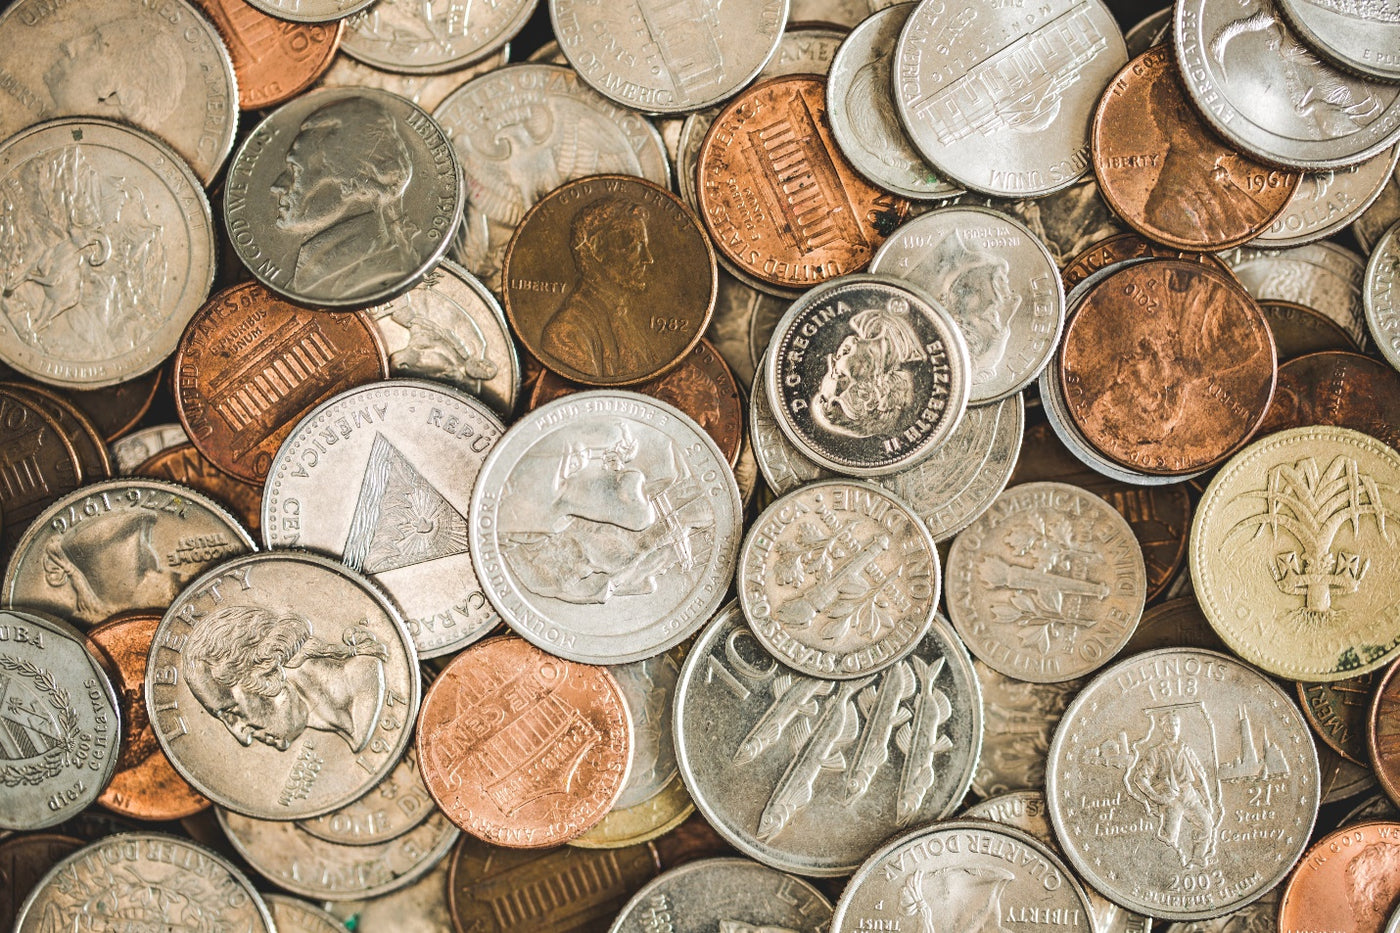 How to Safely Clean Silver Coins without Losing Value